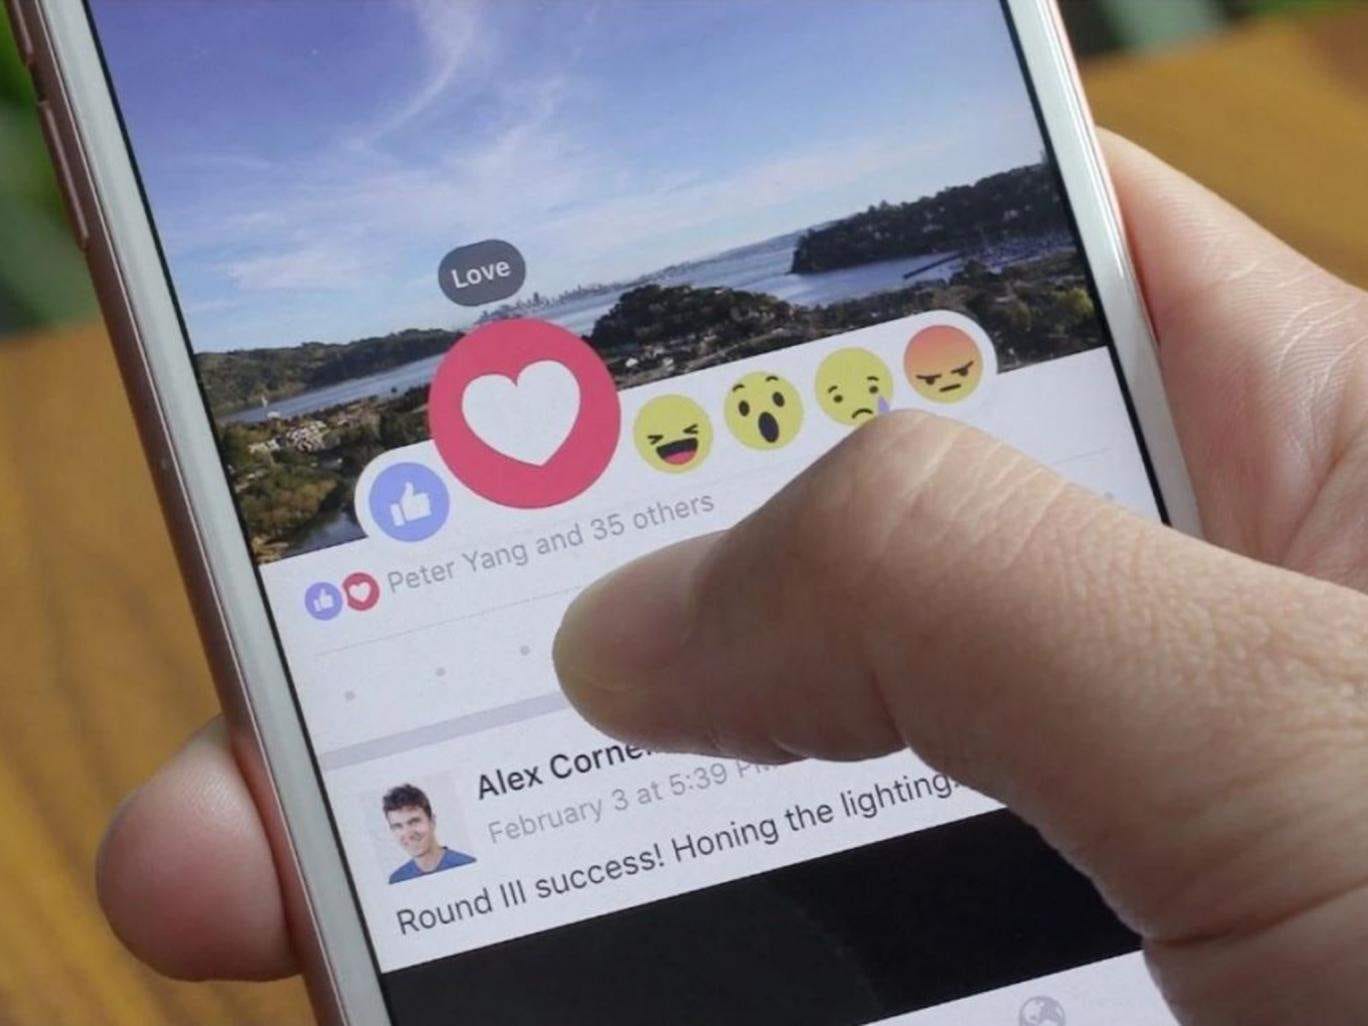 Top 10 Real-Time Marketing Replies To Facebook Reactions | Brand24 Blog